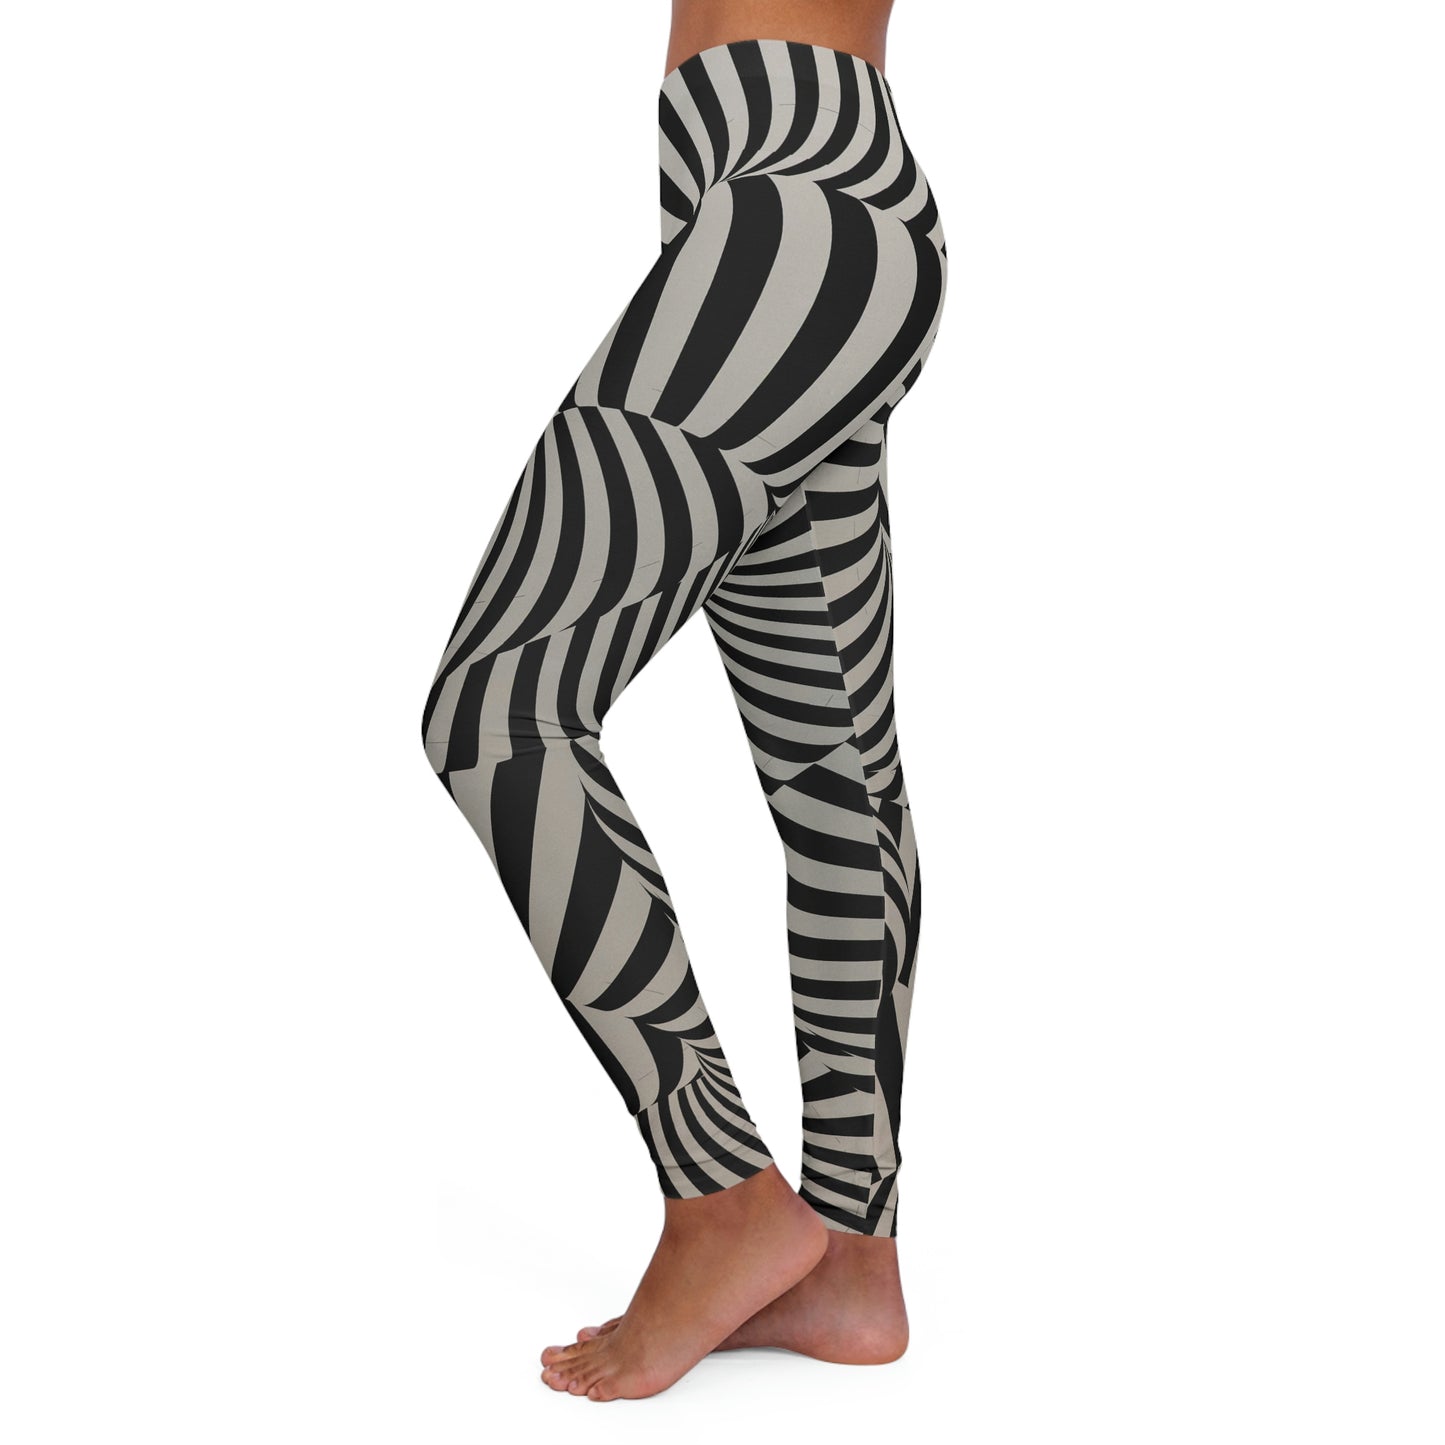 Zebra animal kingdom, Safari Women Leggings, One of a Kind Gift - Workout Activewear tights for Wife Fitness, Best Friend, mom and me tights Christmas Gift